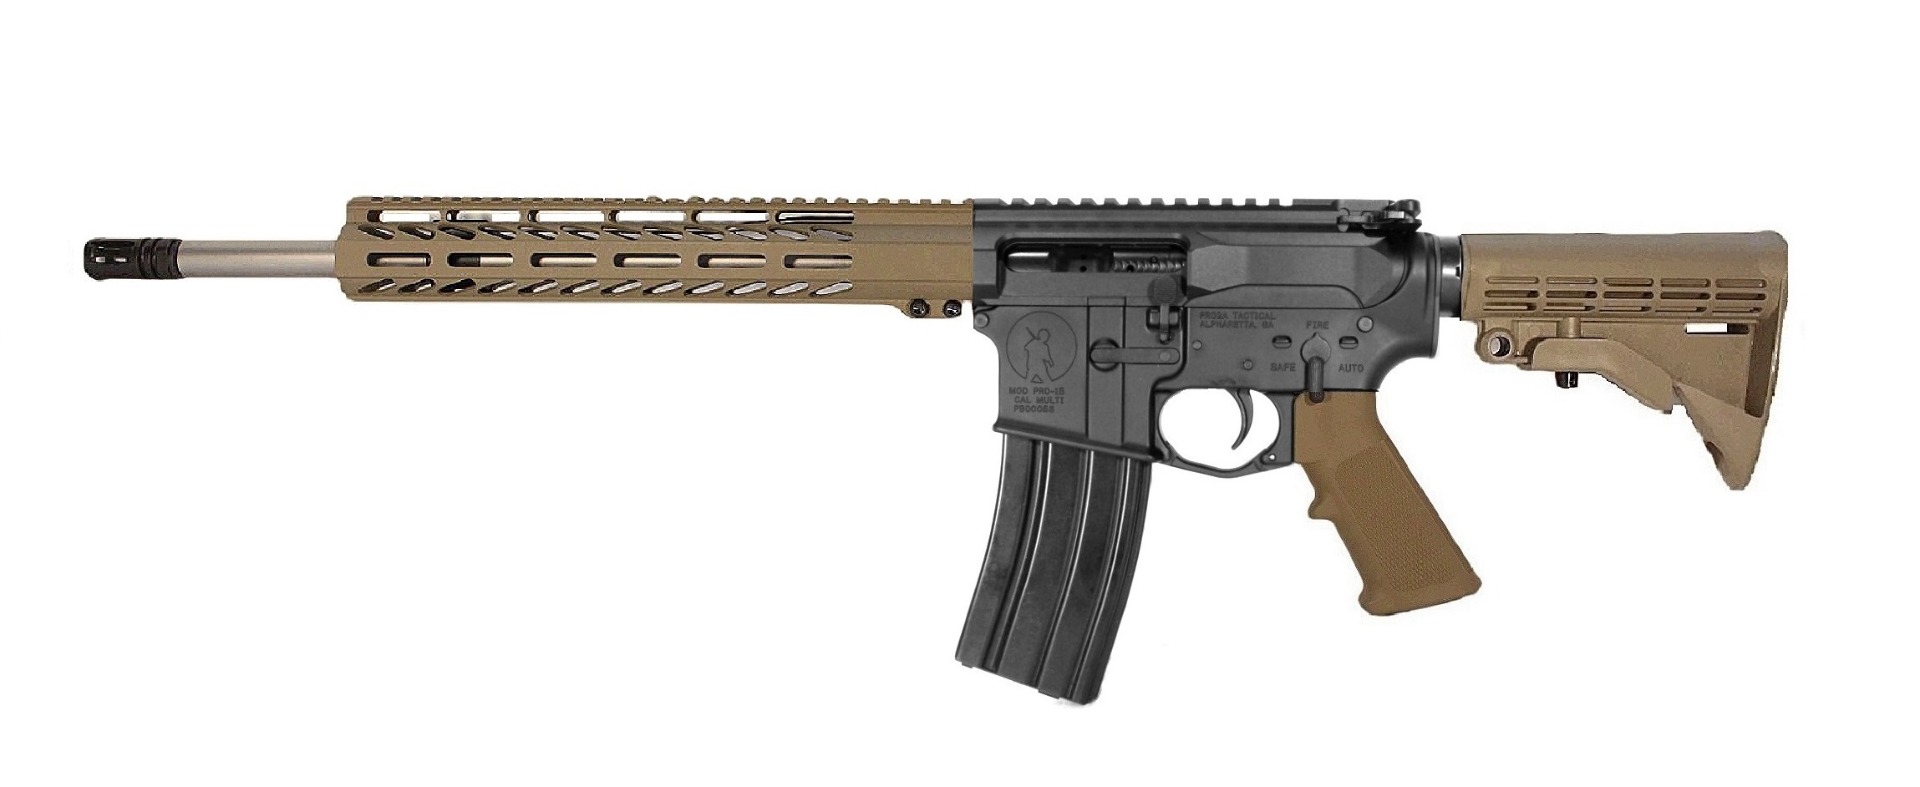 16" 223 Wylde LH Stainless Rifle BLK/FDE 2 Tone